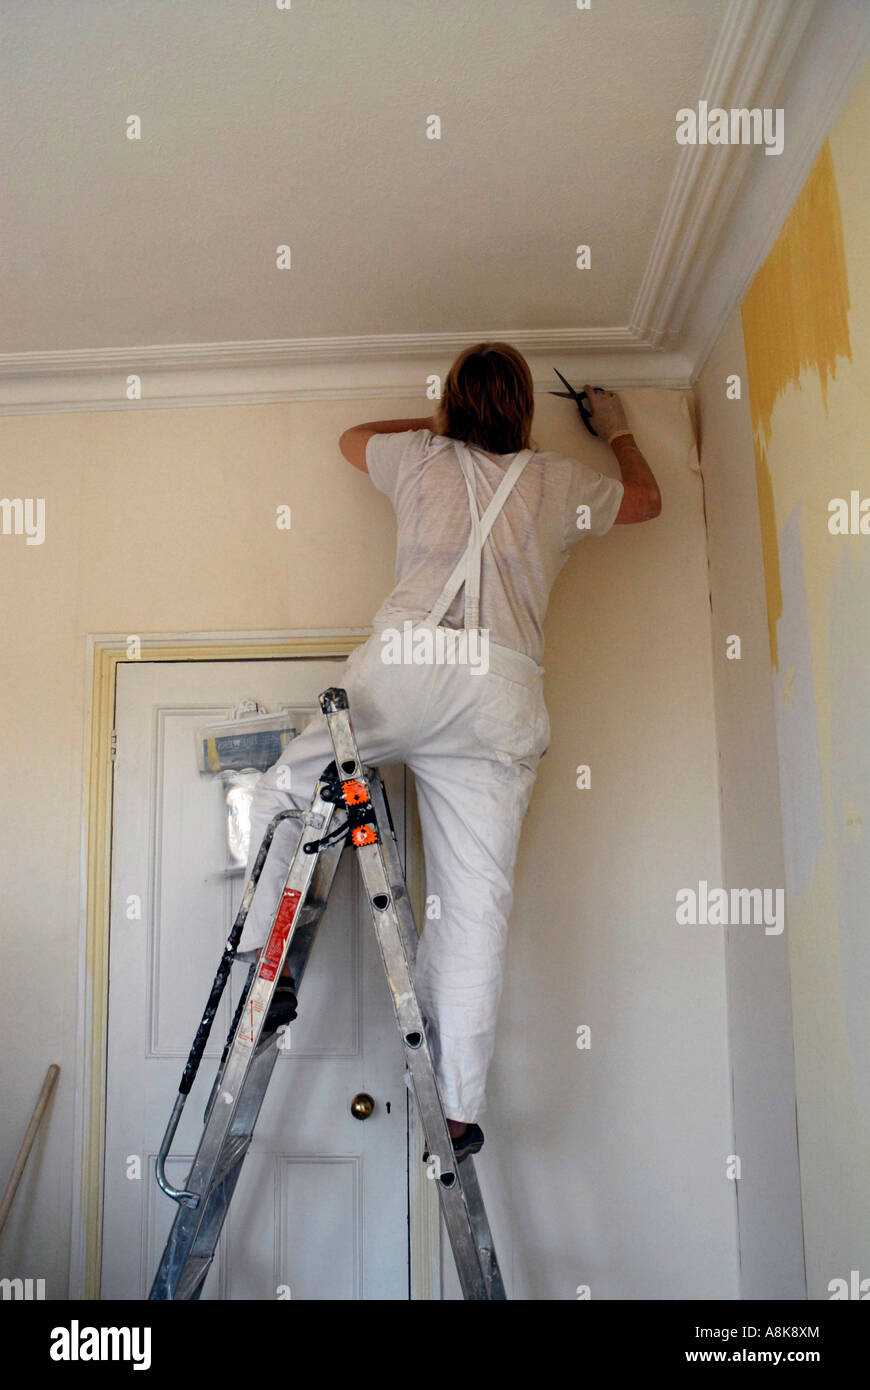 Woman Diy Papering Her Room Walls With Lining Paper Stock